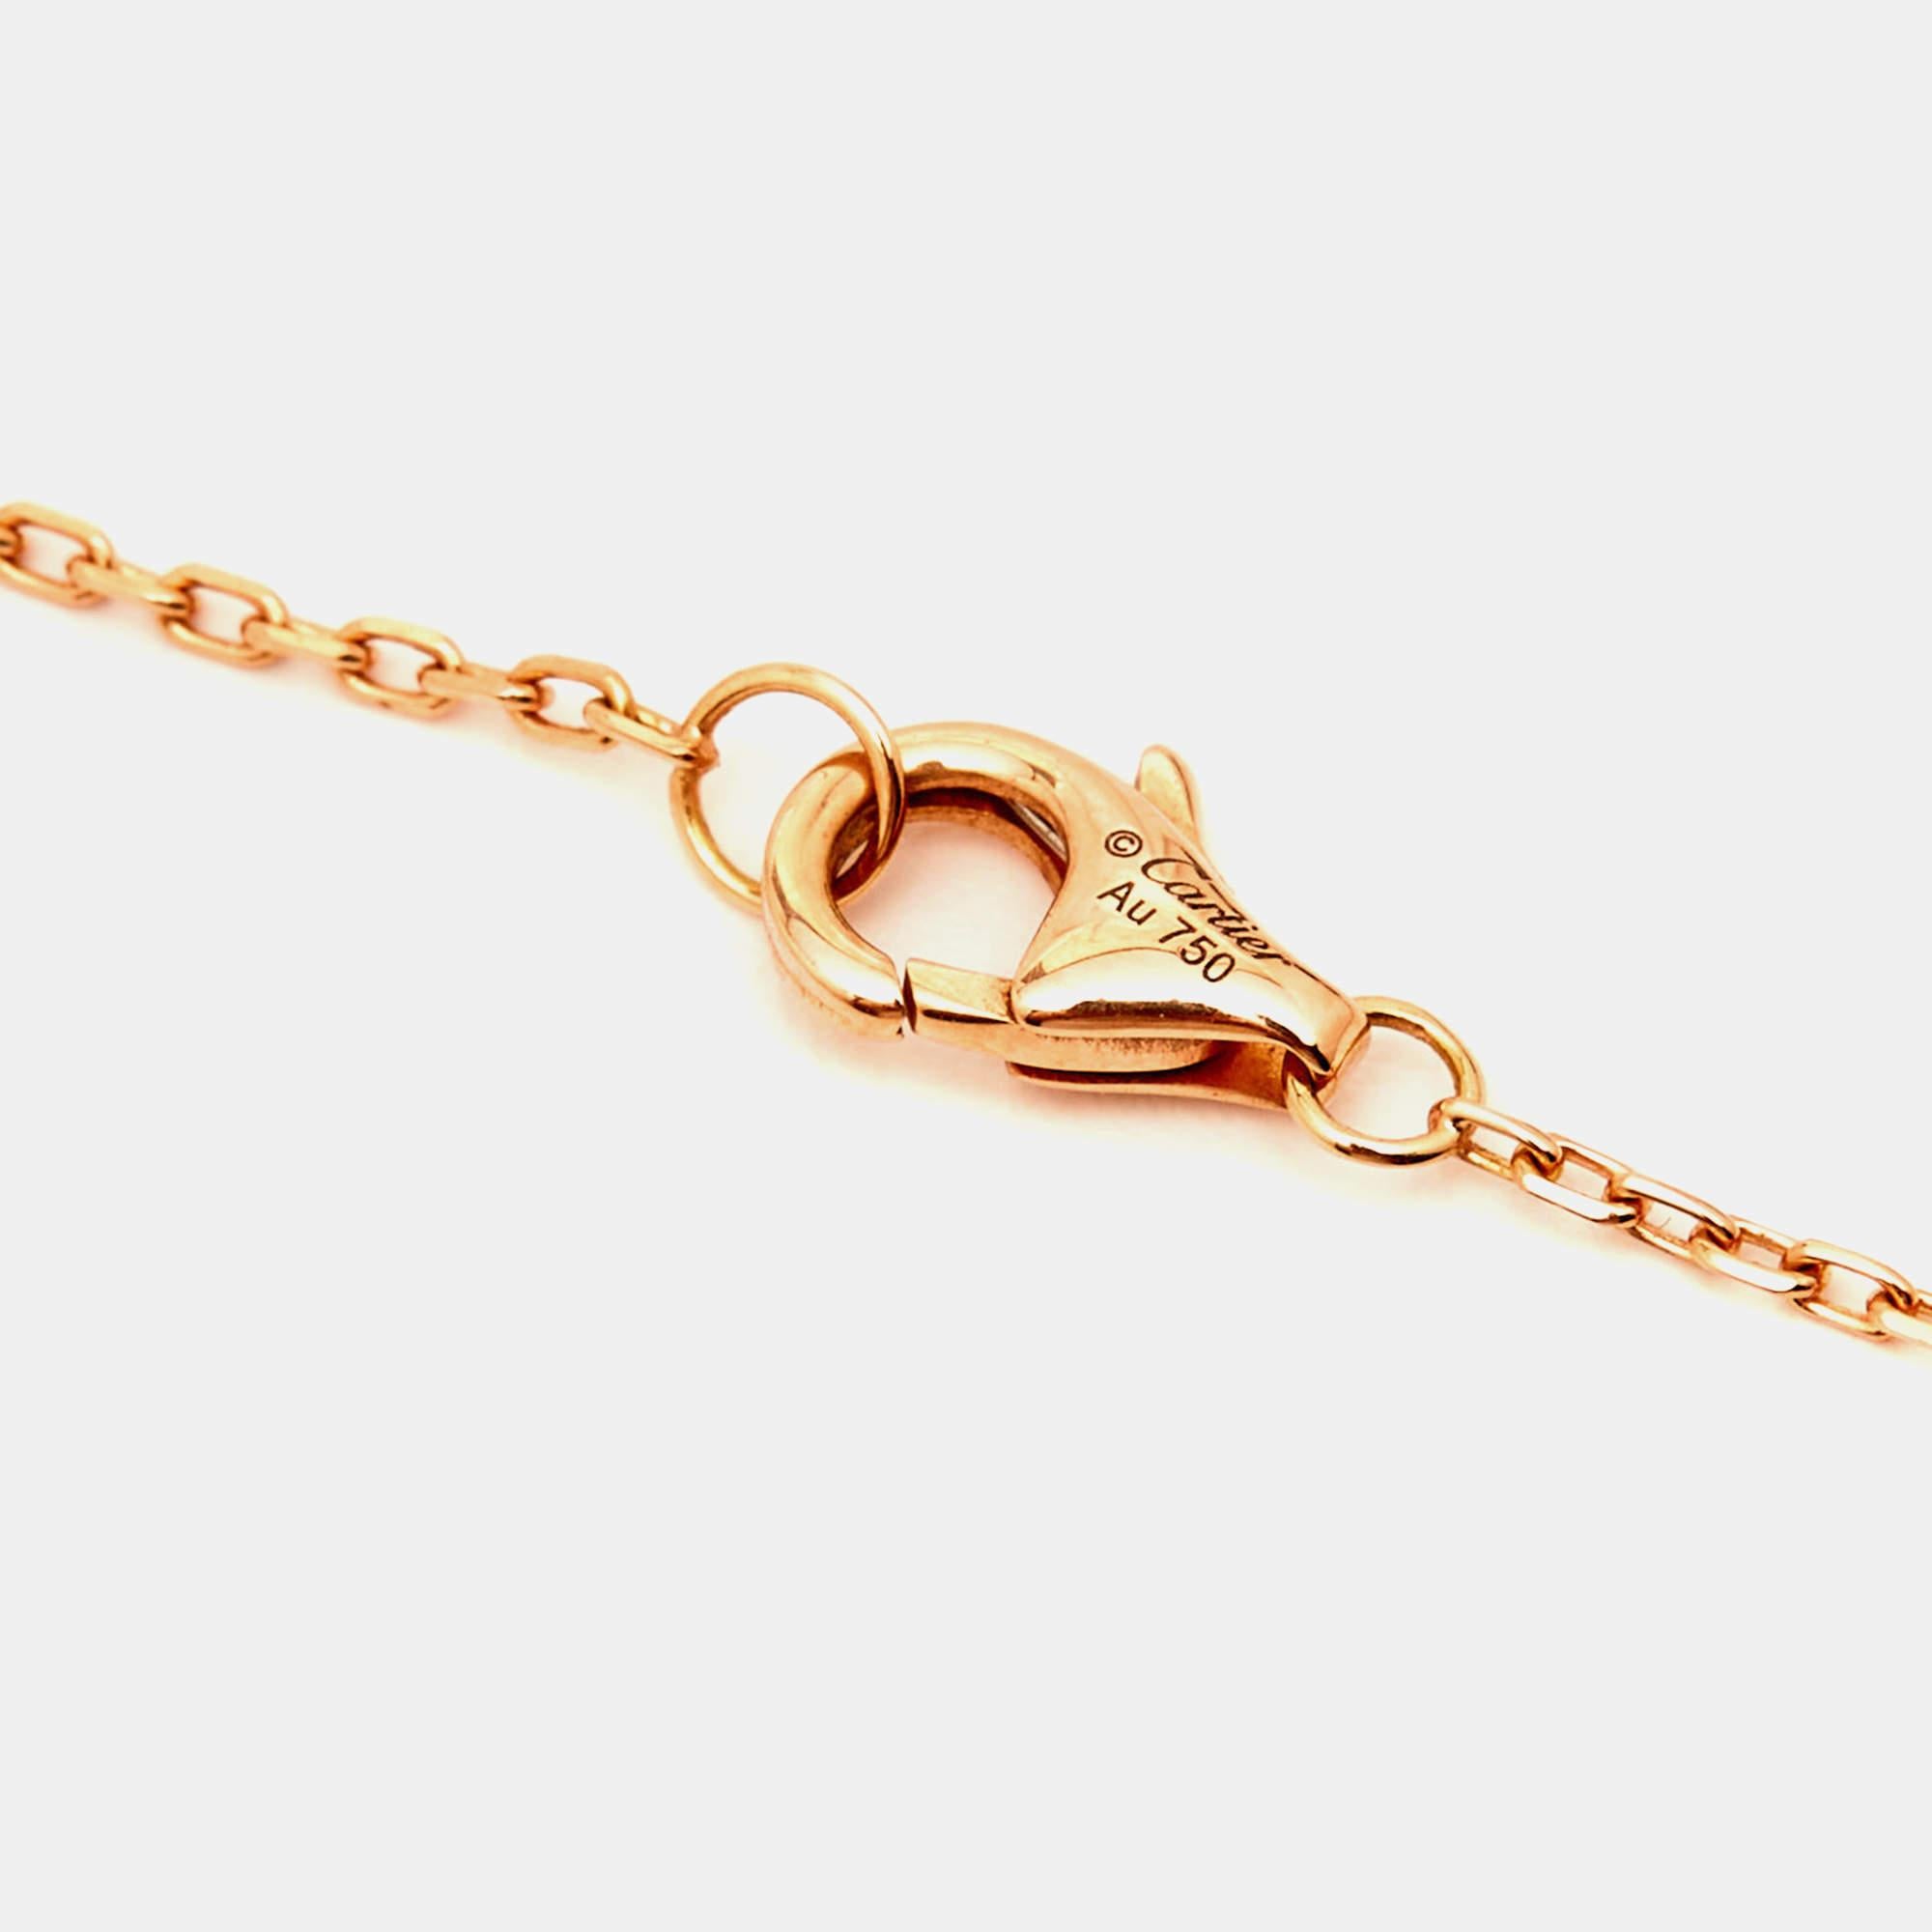 The Cartier necklace is a luxurious piece of jewelry featuring three intertwined rings made of 18k white, yellow, and rose gold. This iconic design symbolizes love, fidelity, and friendship, creating an elegant and timeless accessory.

Includes: